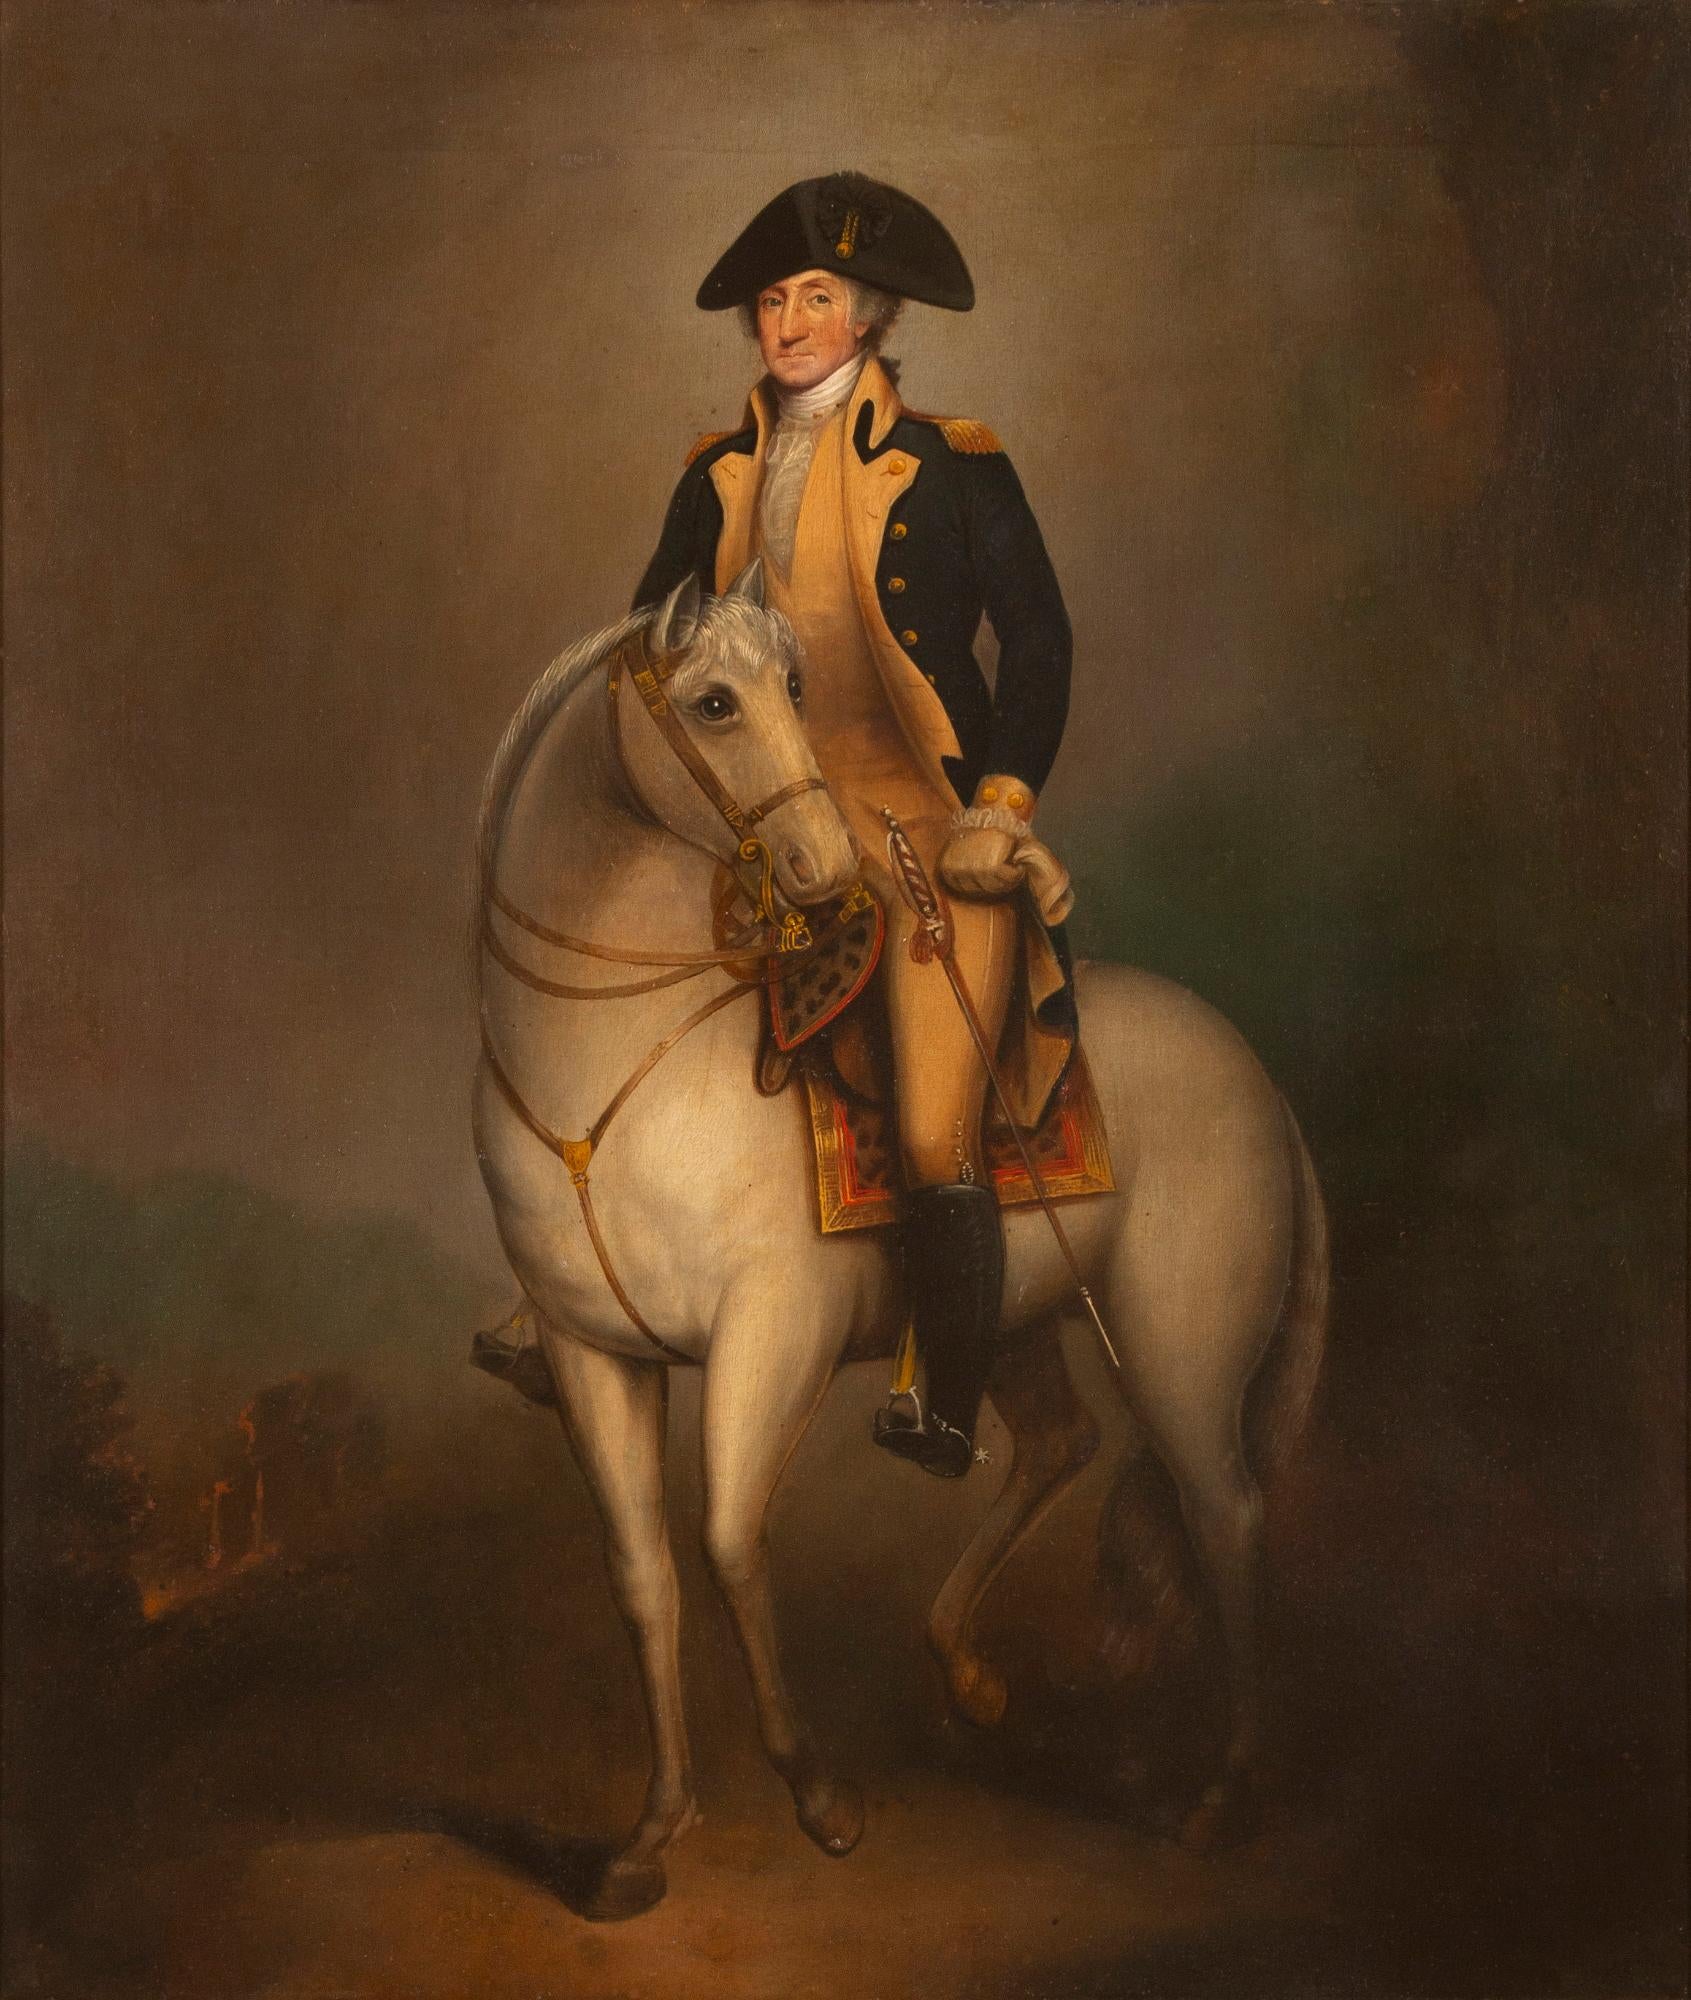 “EQUESTRIAN WASHINGTON,” OIL ON CANVAS PAINTING OF GEORGE WASHINGTON ON BLUESKIN, AFTER REMBRANDT PEALE, circa 1830-1850 (POSSIBLY PRIOR):

Born in Bucks County Pennsylvania during the American Revolution, Rembrandt Peale (Feb. 22, 1778 – Oct. 3,